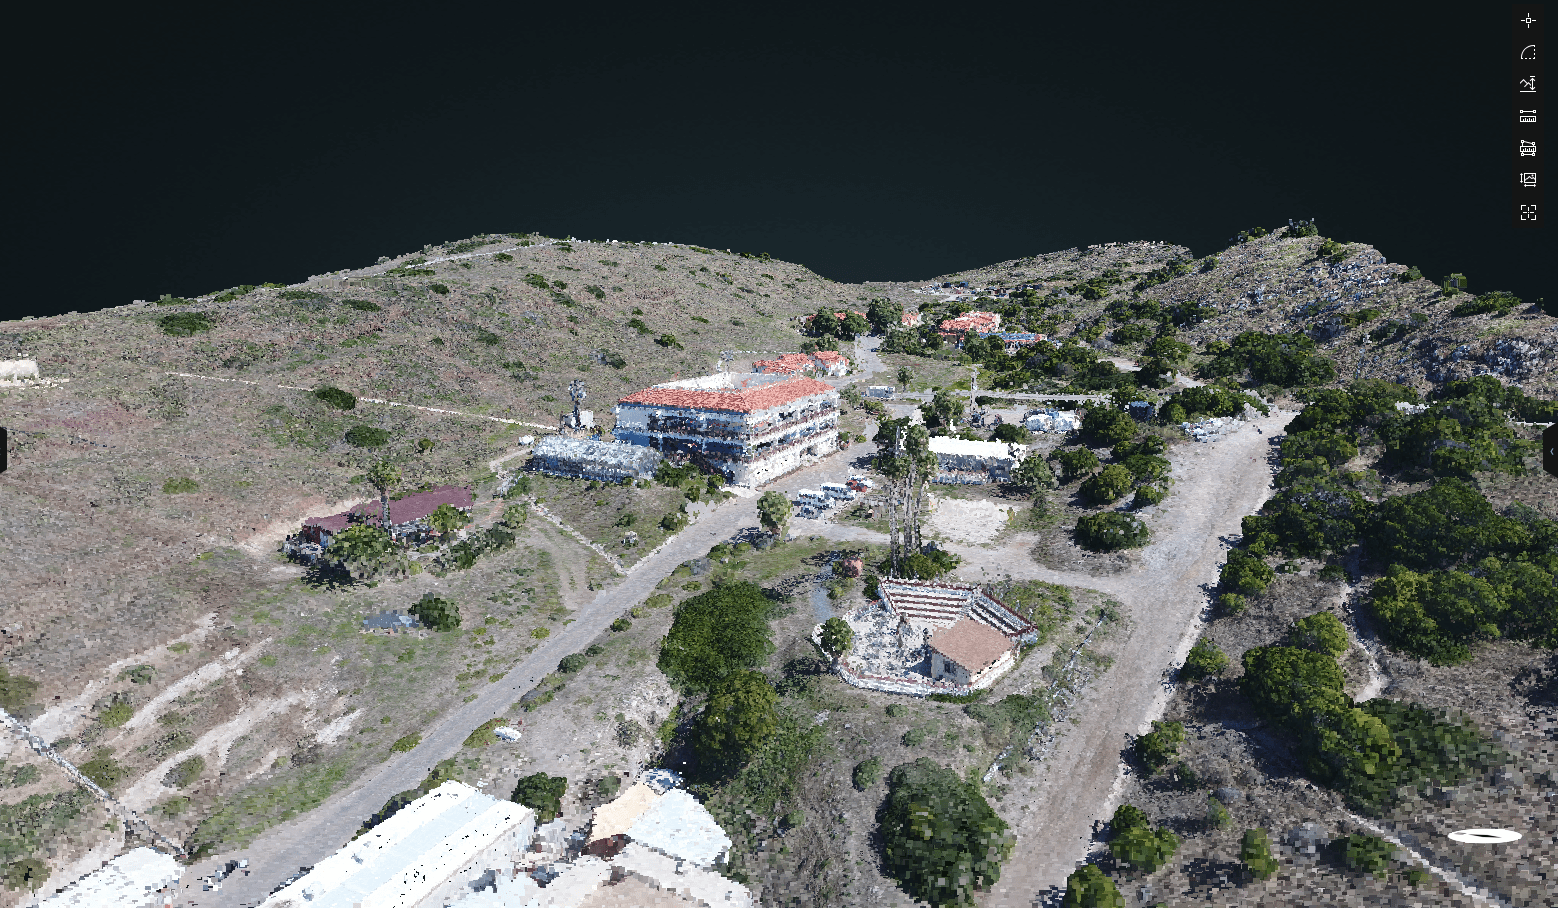 GeoAcuity and USC students create a 3D point cloud of Catalina Island in California using high-accuracy drone imagery georeferenced with the Eos Arrow Gold GNSS receiver for ground control points GCPs